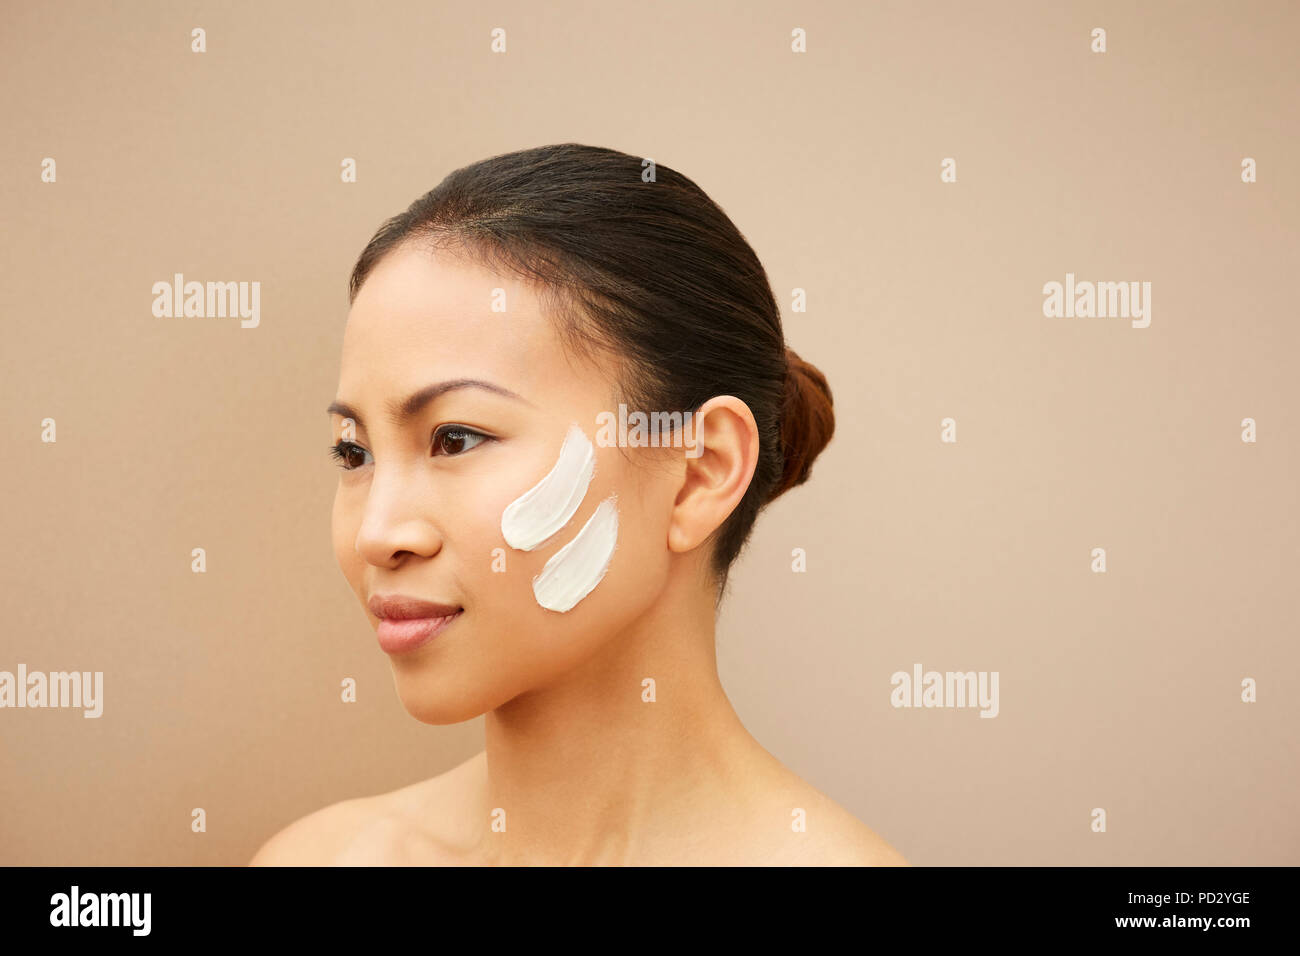 Woman with white marks on cheek Stock Photo